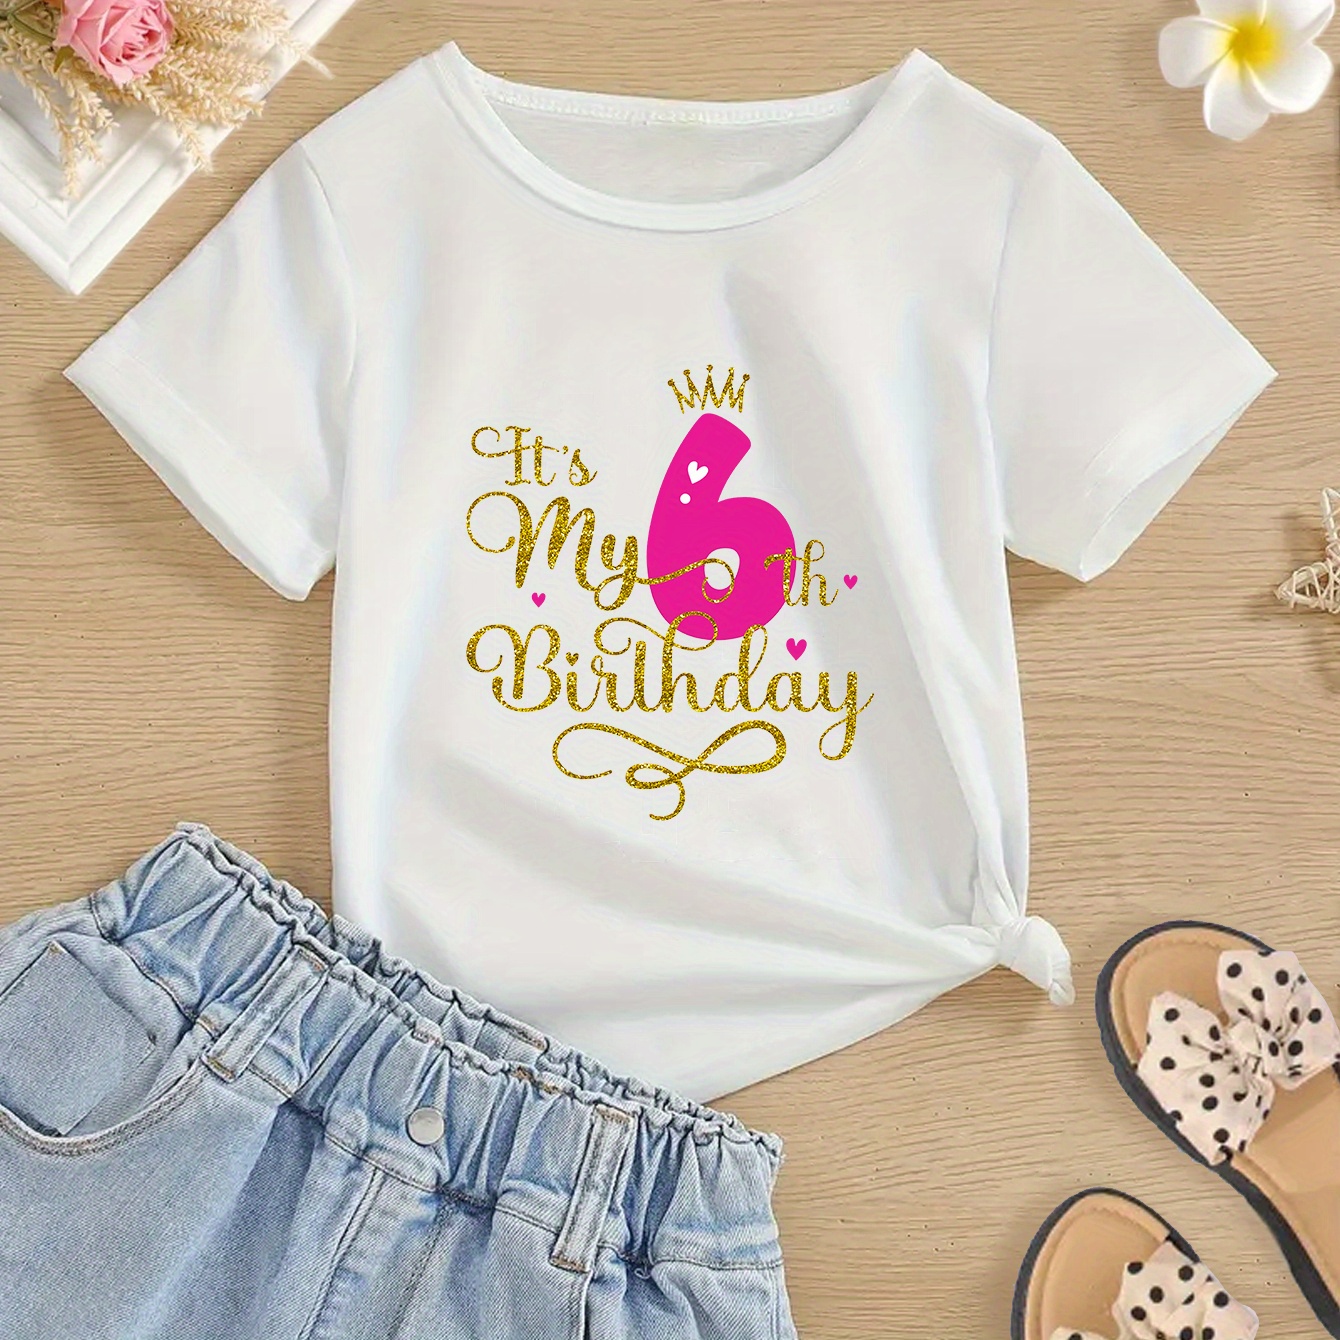 

It's My 6th Birthday Artistic Fashion Creative Letter Print Girls Casual Comfortable Breathable Crew Neck Short-sleeved T-shirt For Spring/ Summer, Suitable For Outdoor Activities